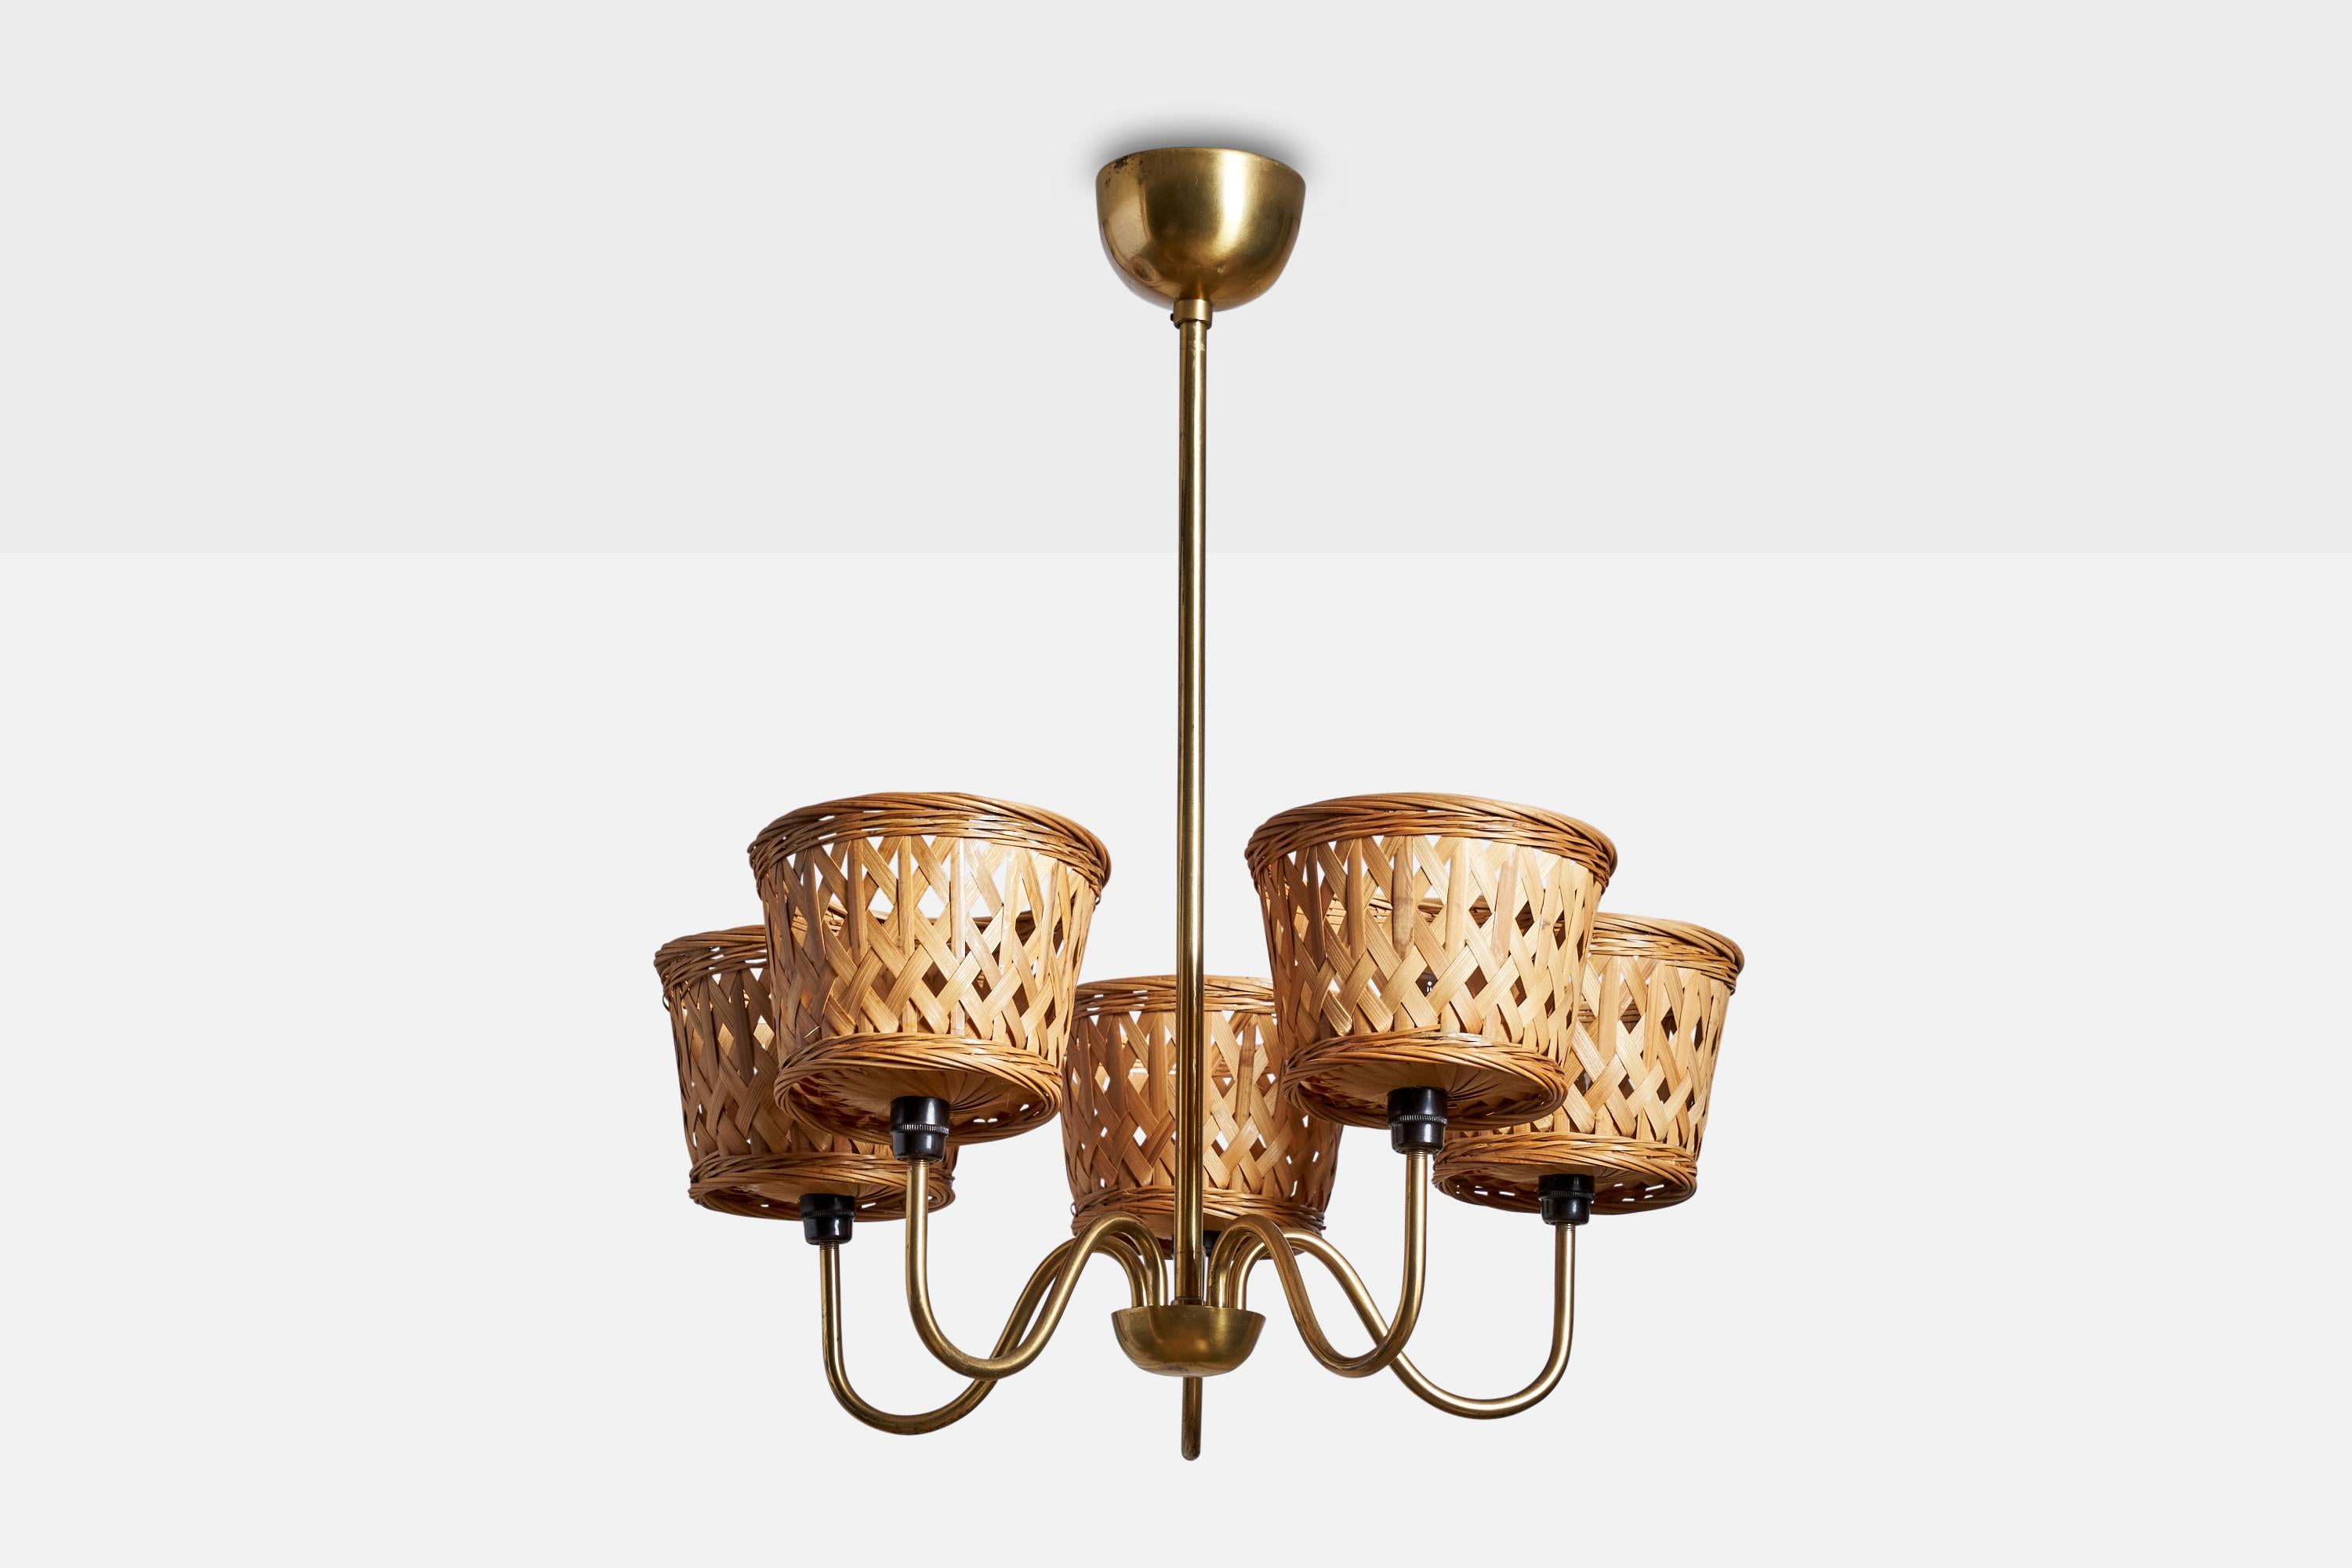 A brass and rattan chandelier designed and produced in Sweden, 1950s.

Dimensions of canopy (inches): 2.5” H x 3.5”  Diameter
Socket takes standard E-14 bulbs. 5 sockets.There is no maximum wattage stated on the fixture. All lighting will be